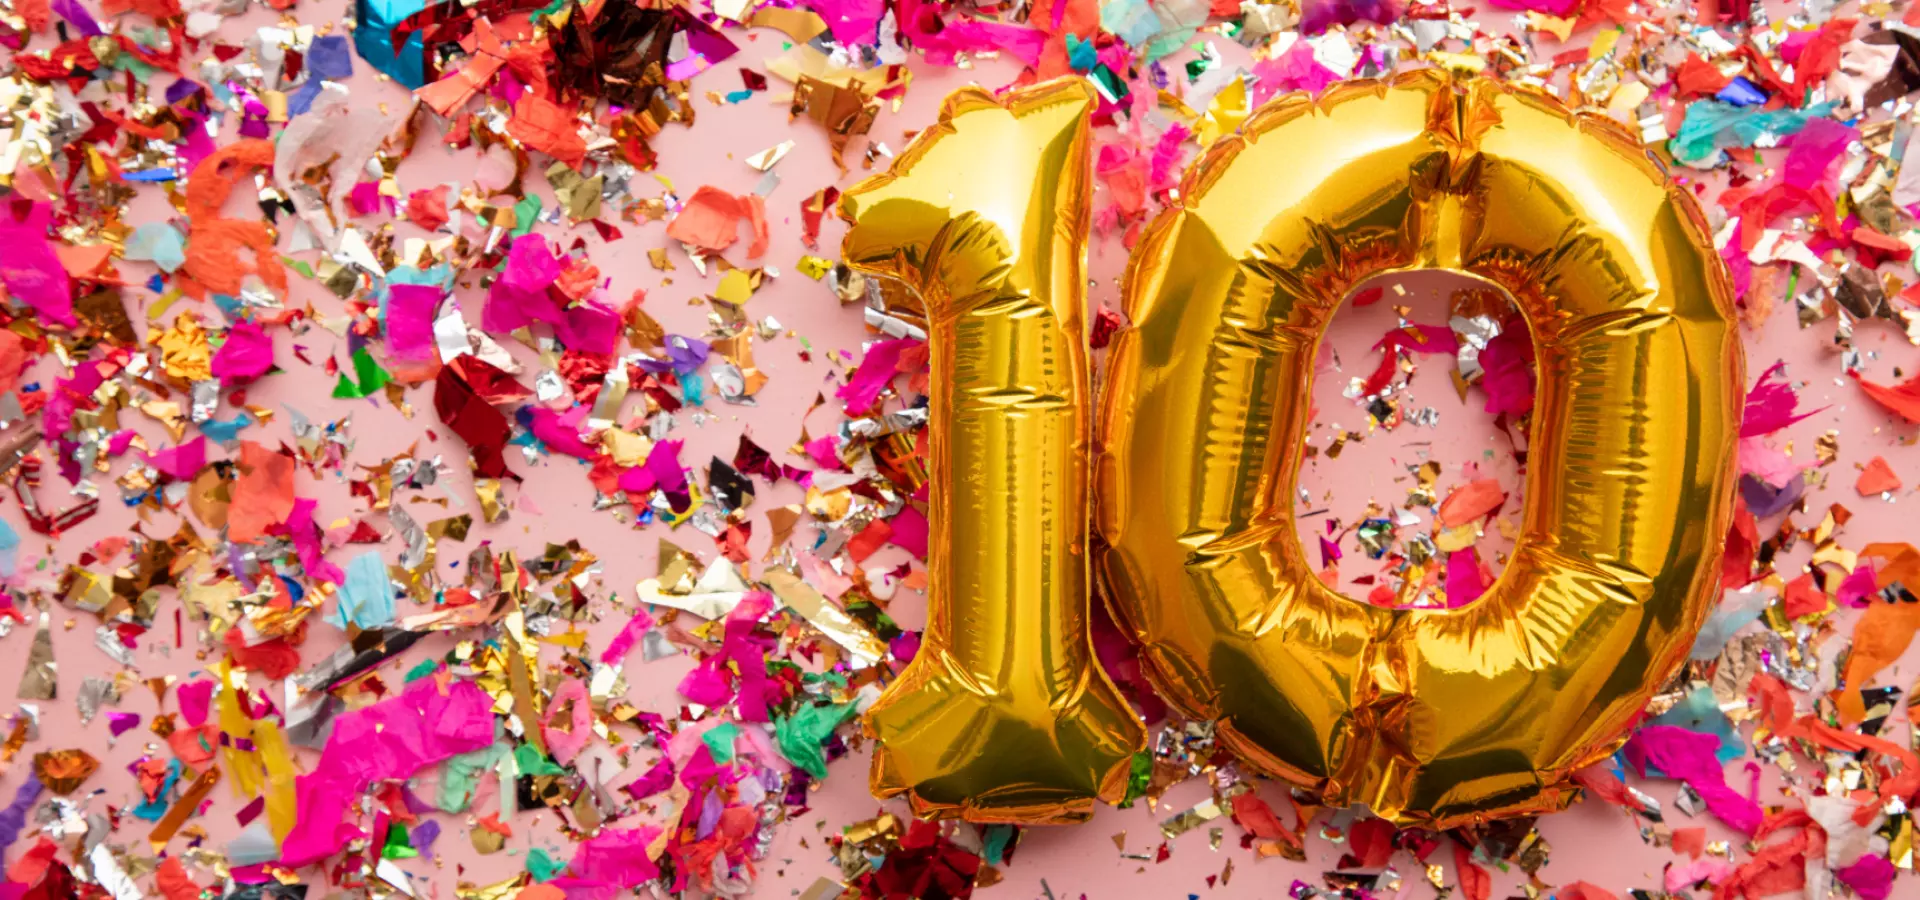 Golden balloons in the shape of '10' with colourful confetti on a pink background.